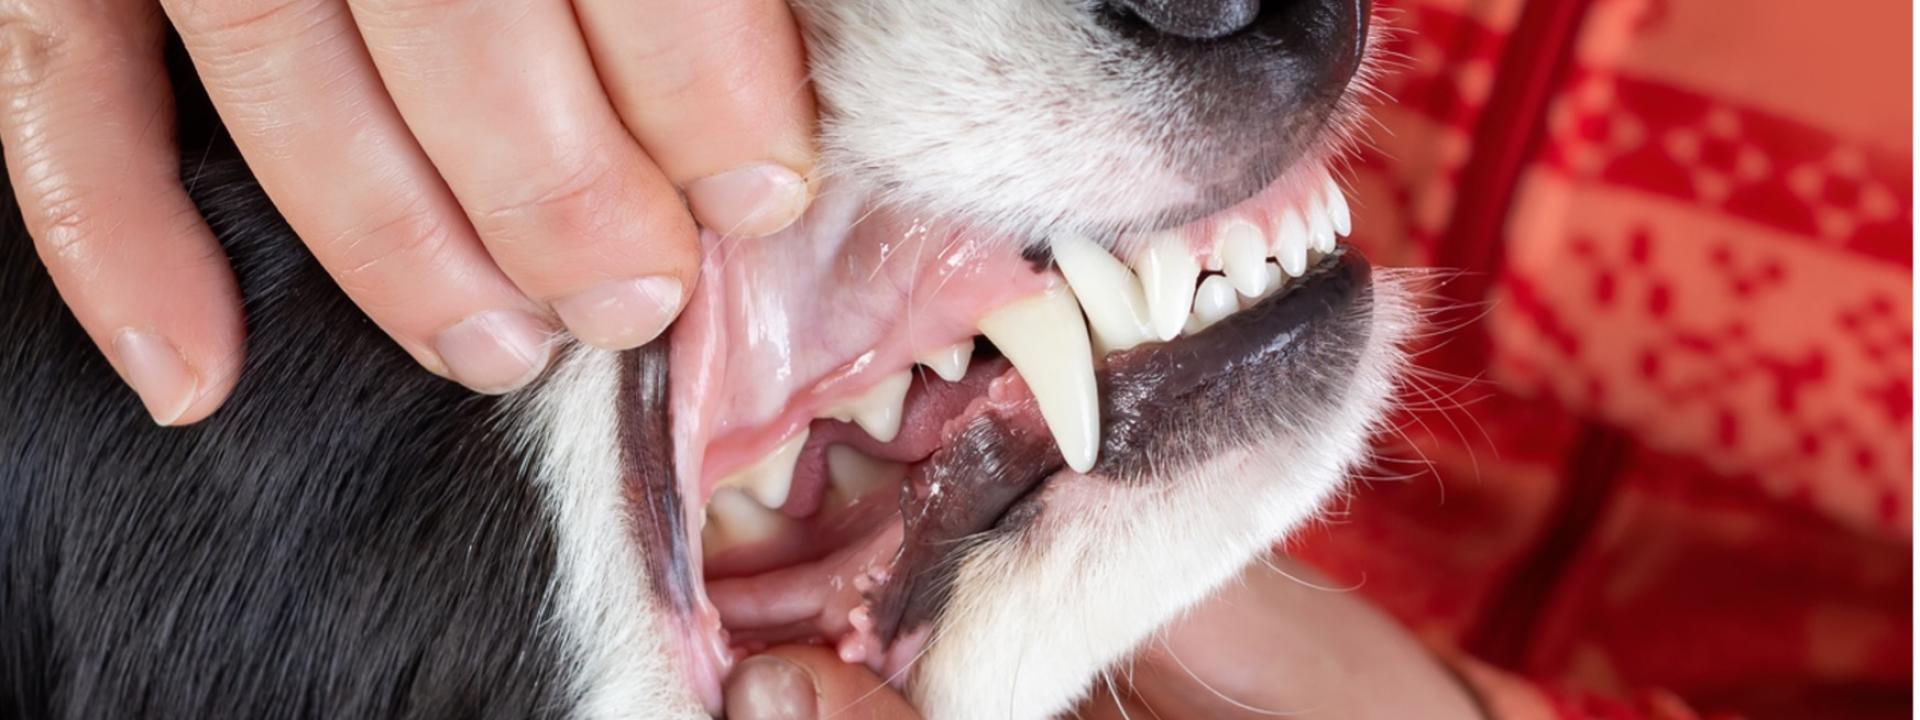 person inspecting dog's teeth